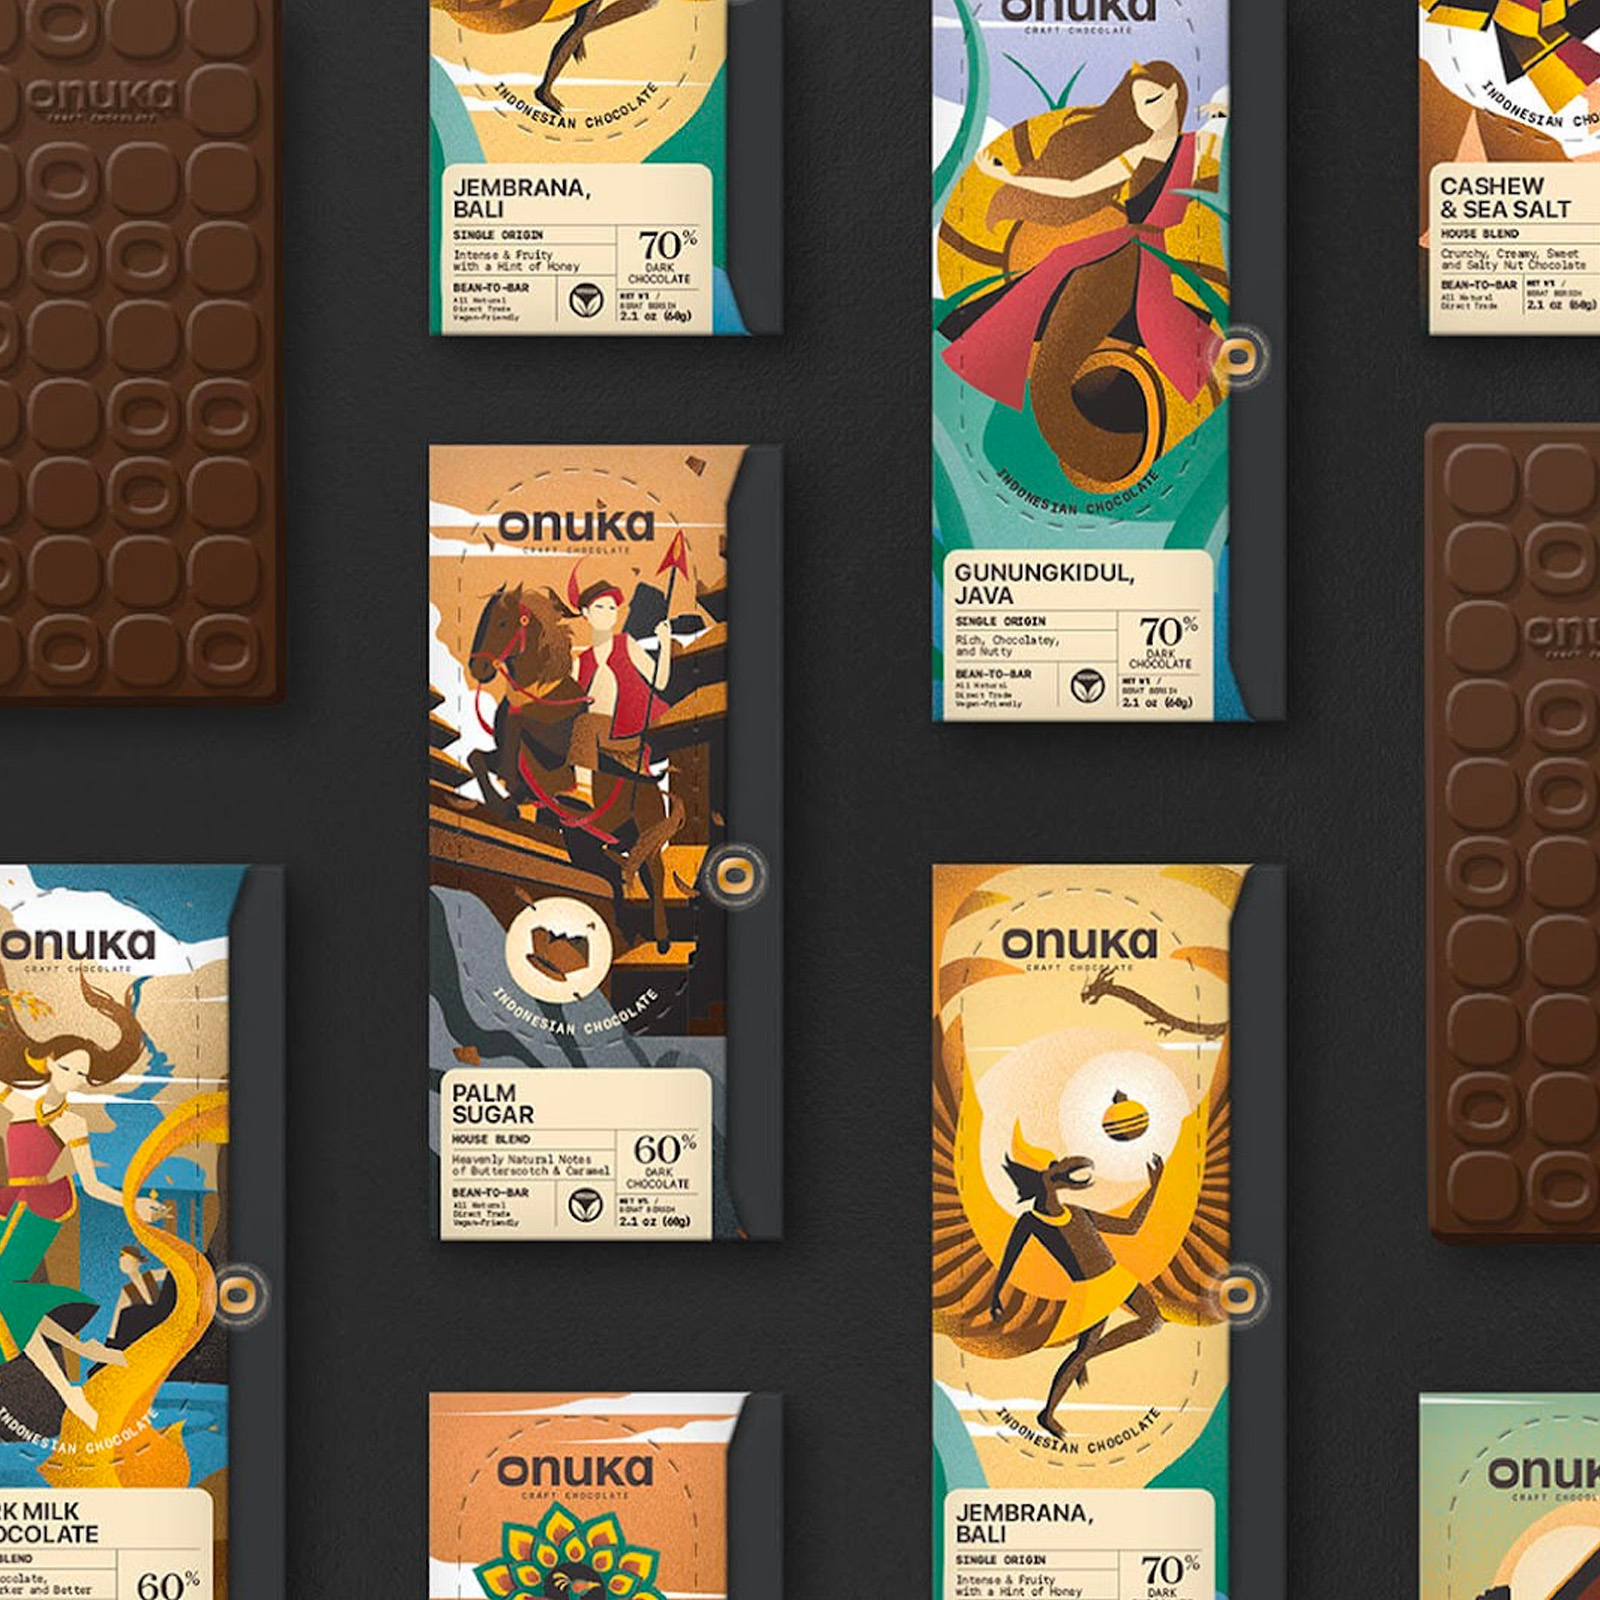 Crafting Nature's Delight: EGGHEAD's Packaging and Branding for Onuka Chocolate